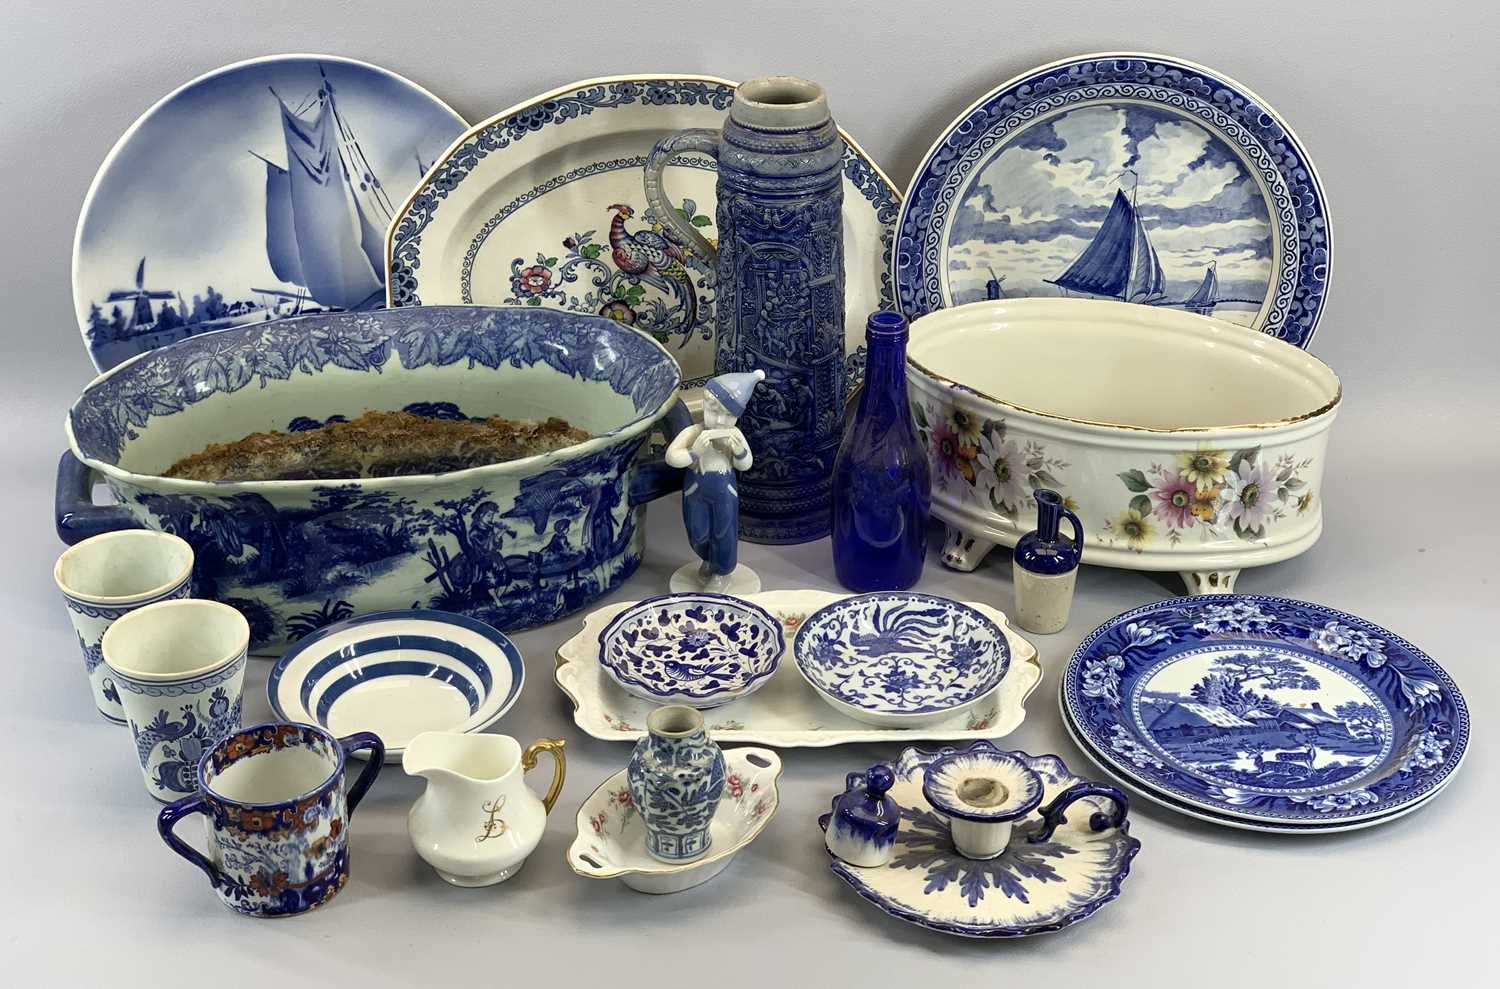 BLUE & WHITE ASSORTMENT - to include Delft ware, Wedgwood, a two handled Flo Blue type planter, ETC